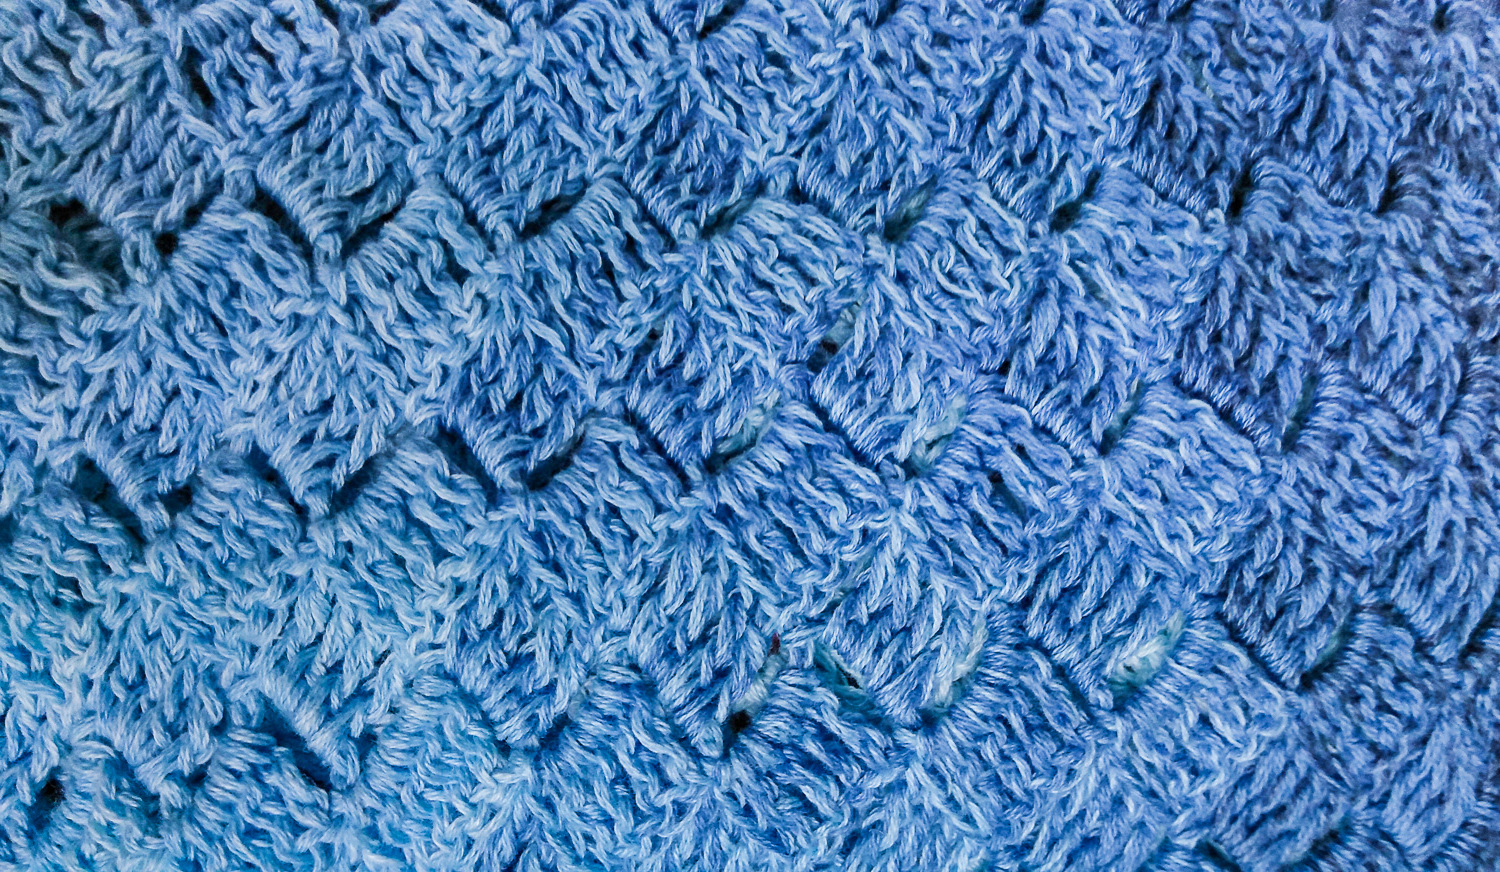 Close-up of crocheted shawl in a blue gradient ayrn